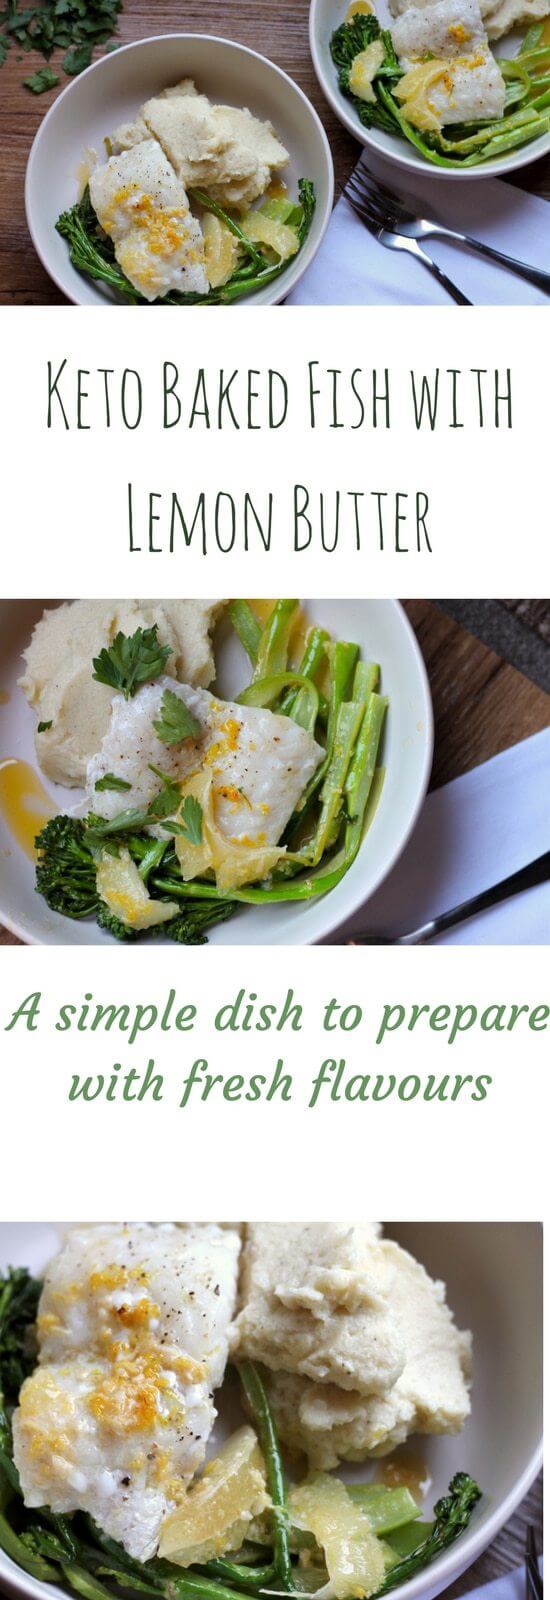 Keto Baked Fish with Lemon Butter